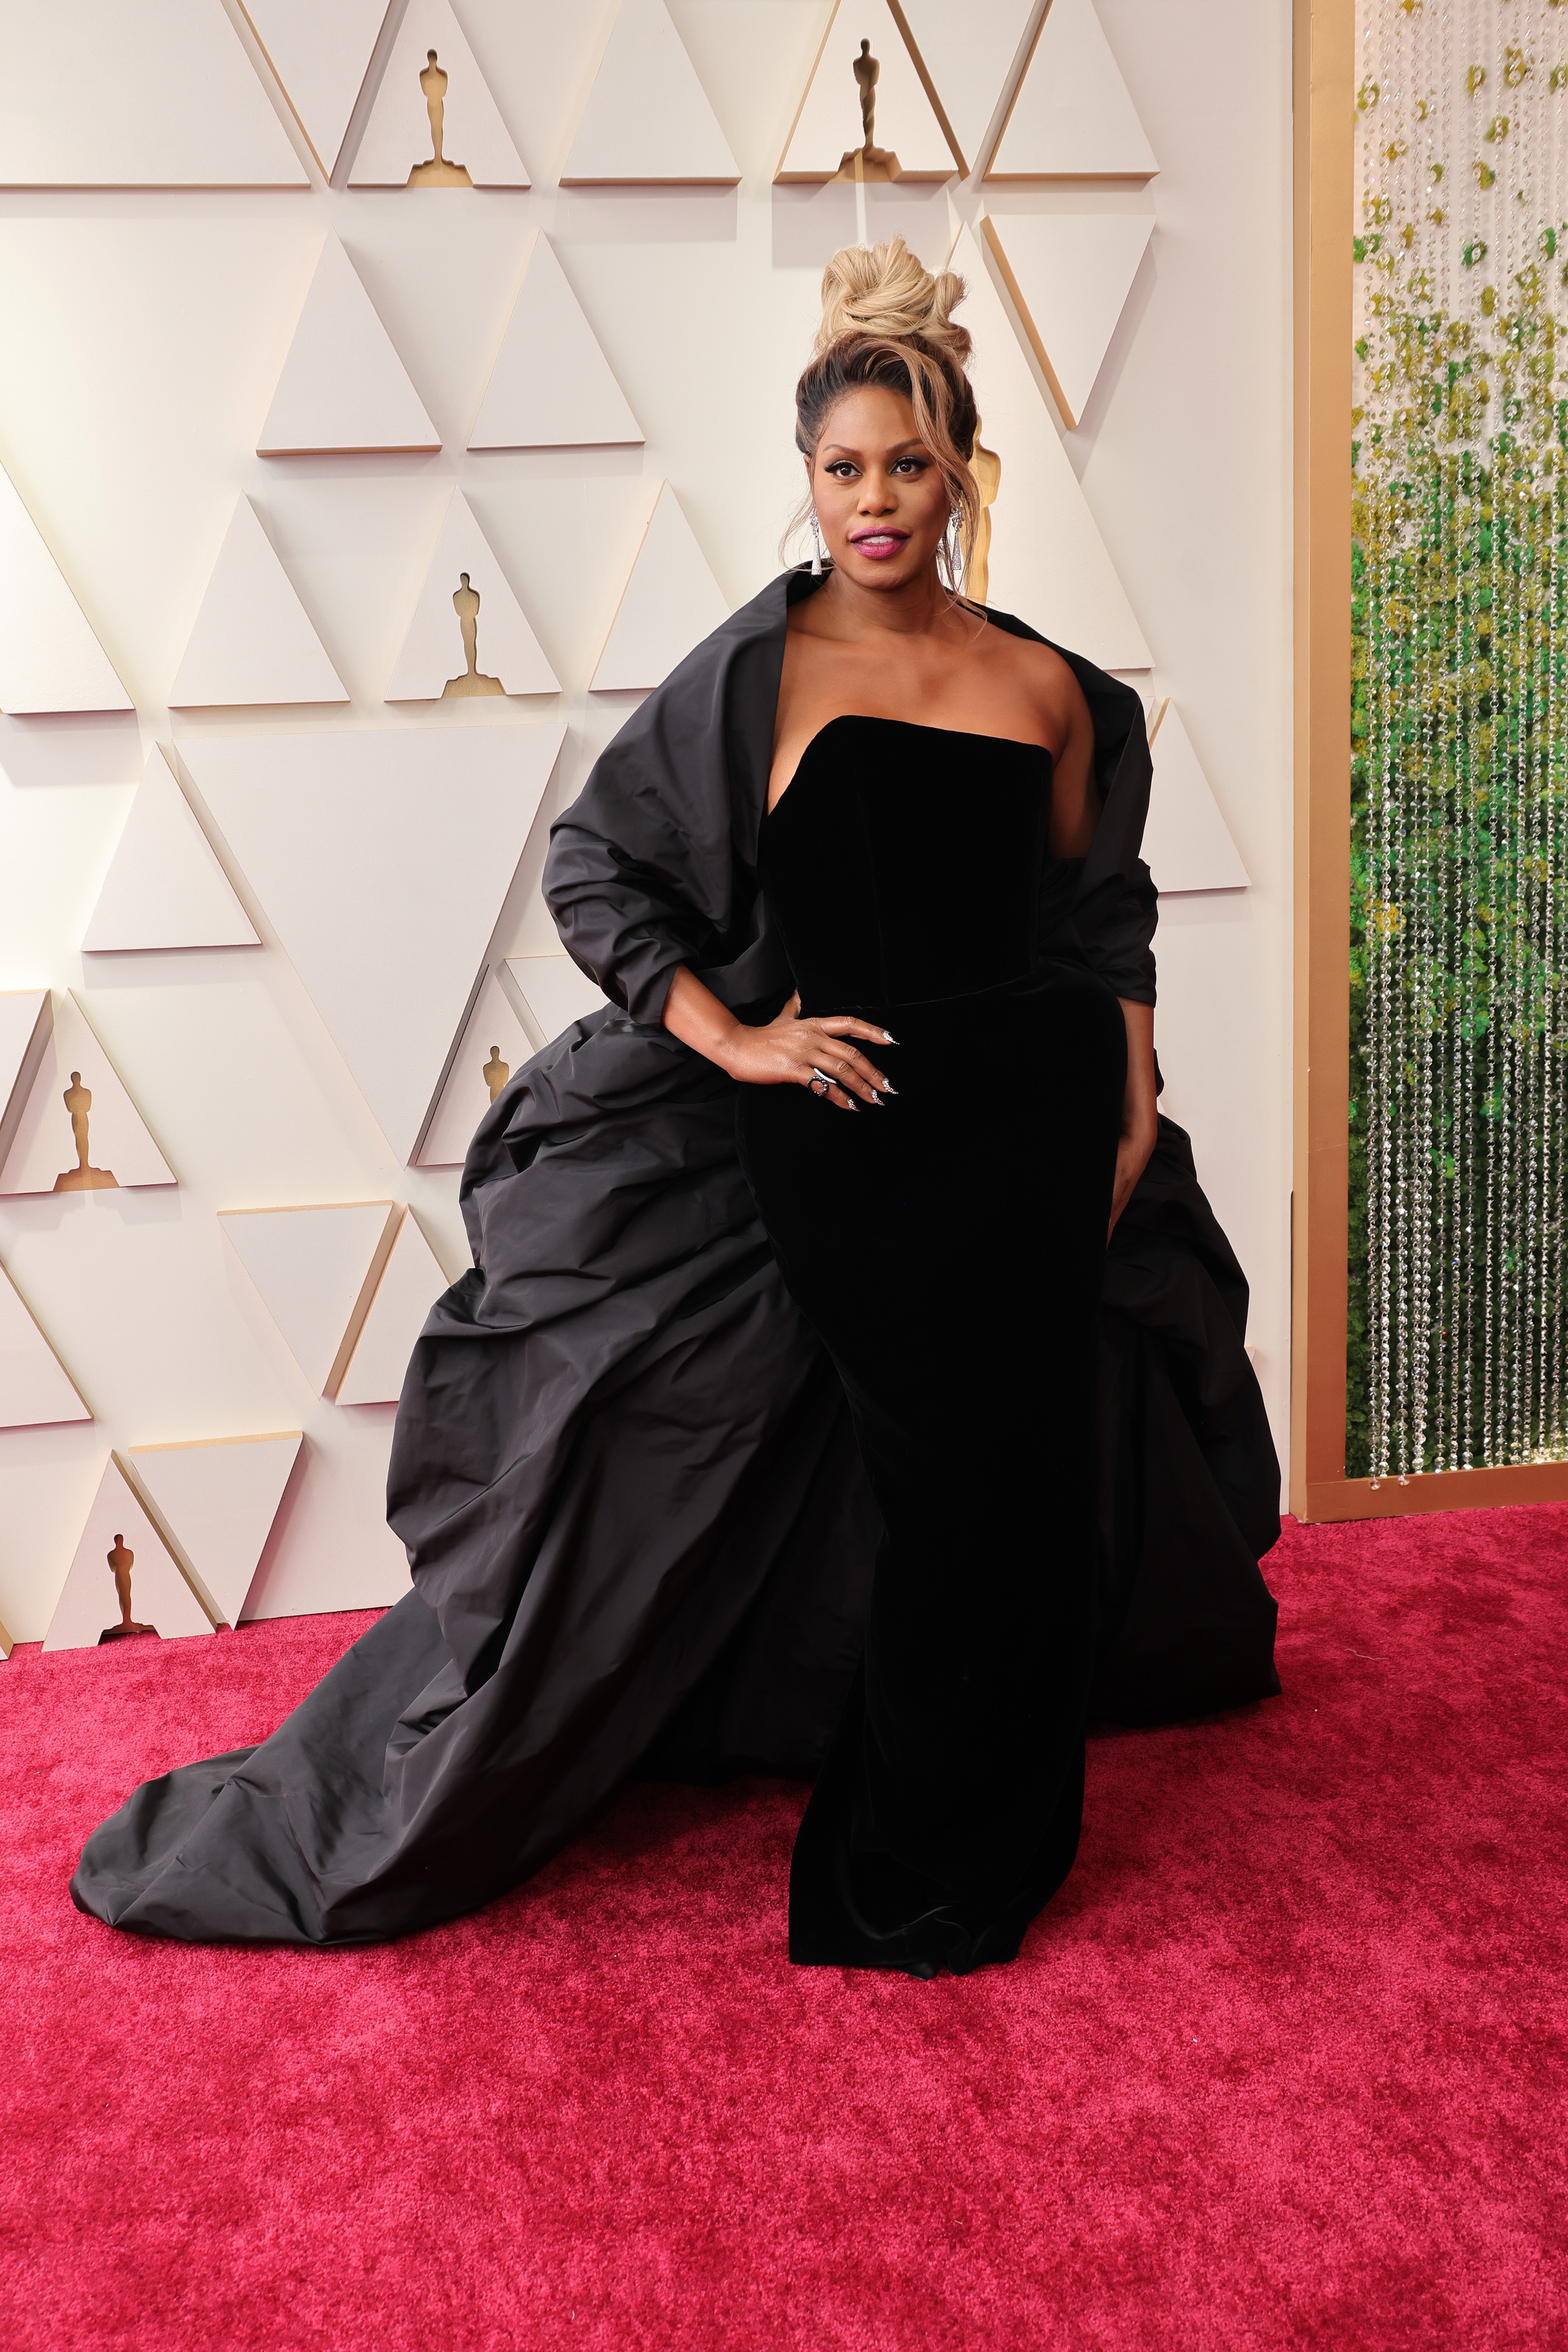 HOLLYWOOD, CALIFORNIA - MARCH 27: Laverne Cox attends the 94th Annual Academy Awards at Hollywood and Highland on March 27, 2022 in Hollywood, California. (Photo by Momodu Mansaray/Getty Images) (Foto: Getty Images)